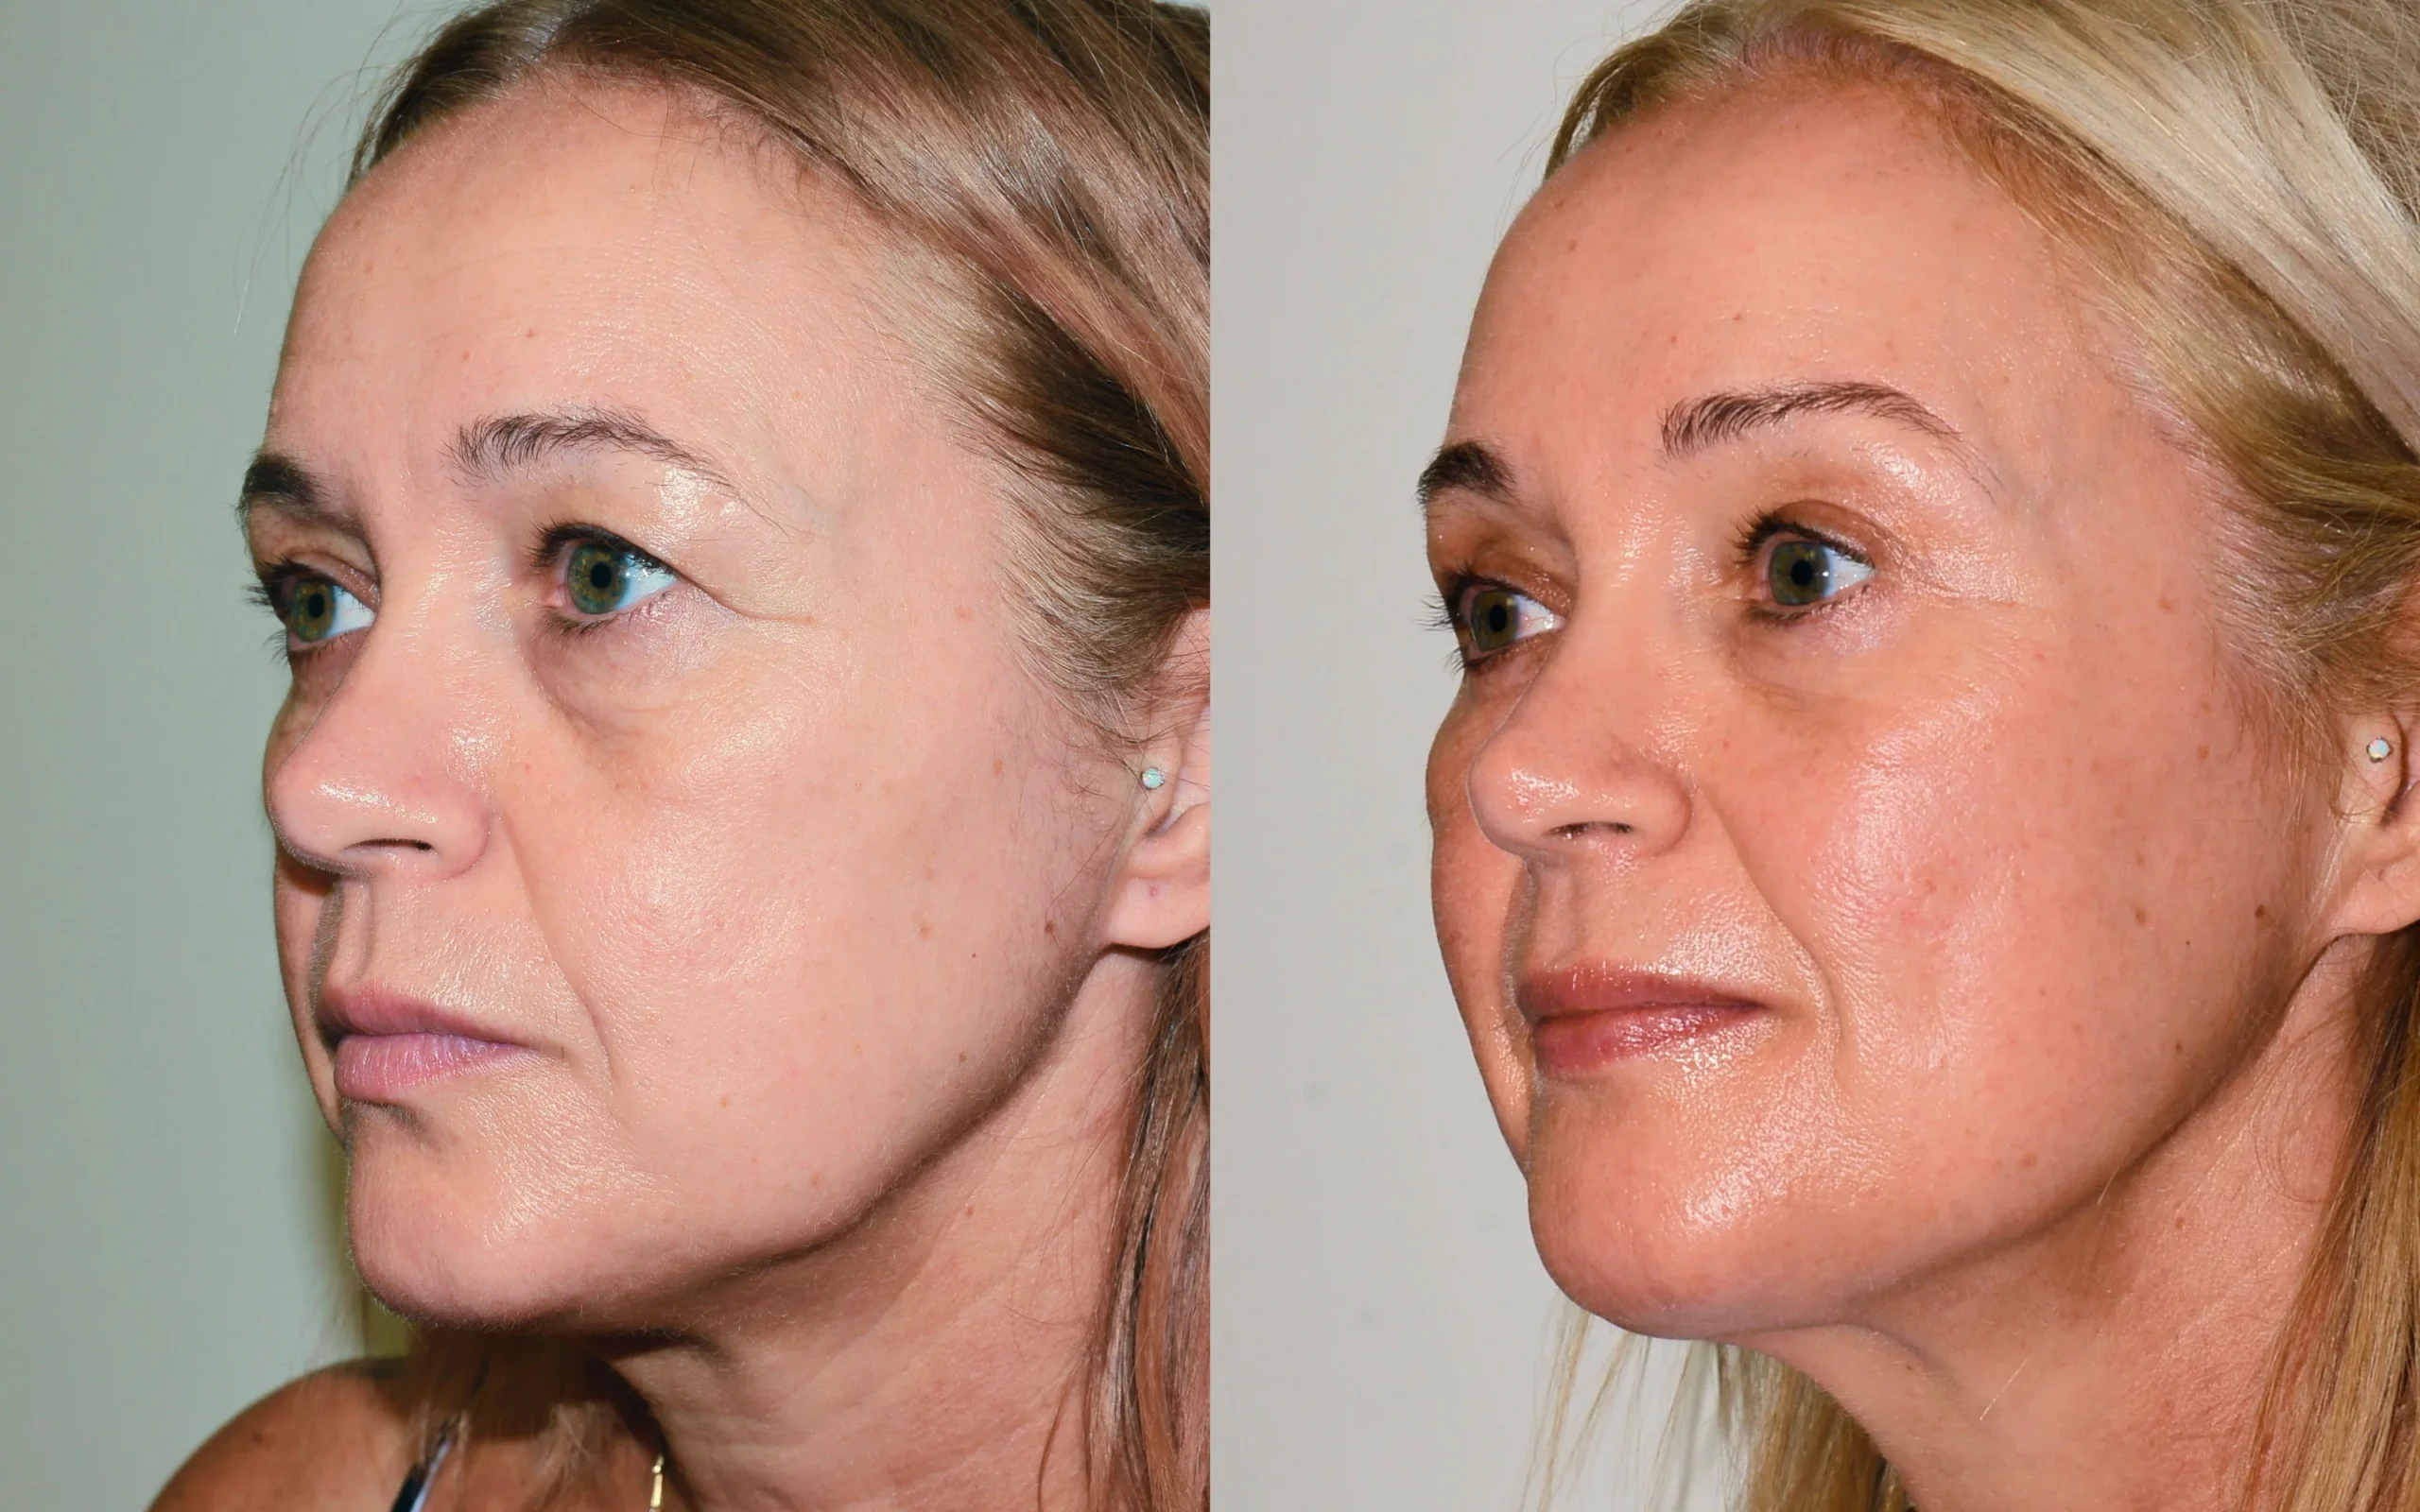 Direct brow lift and eyelid surgery